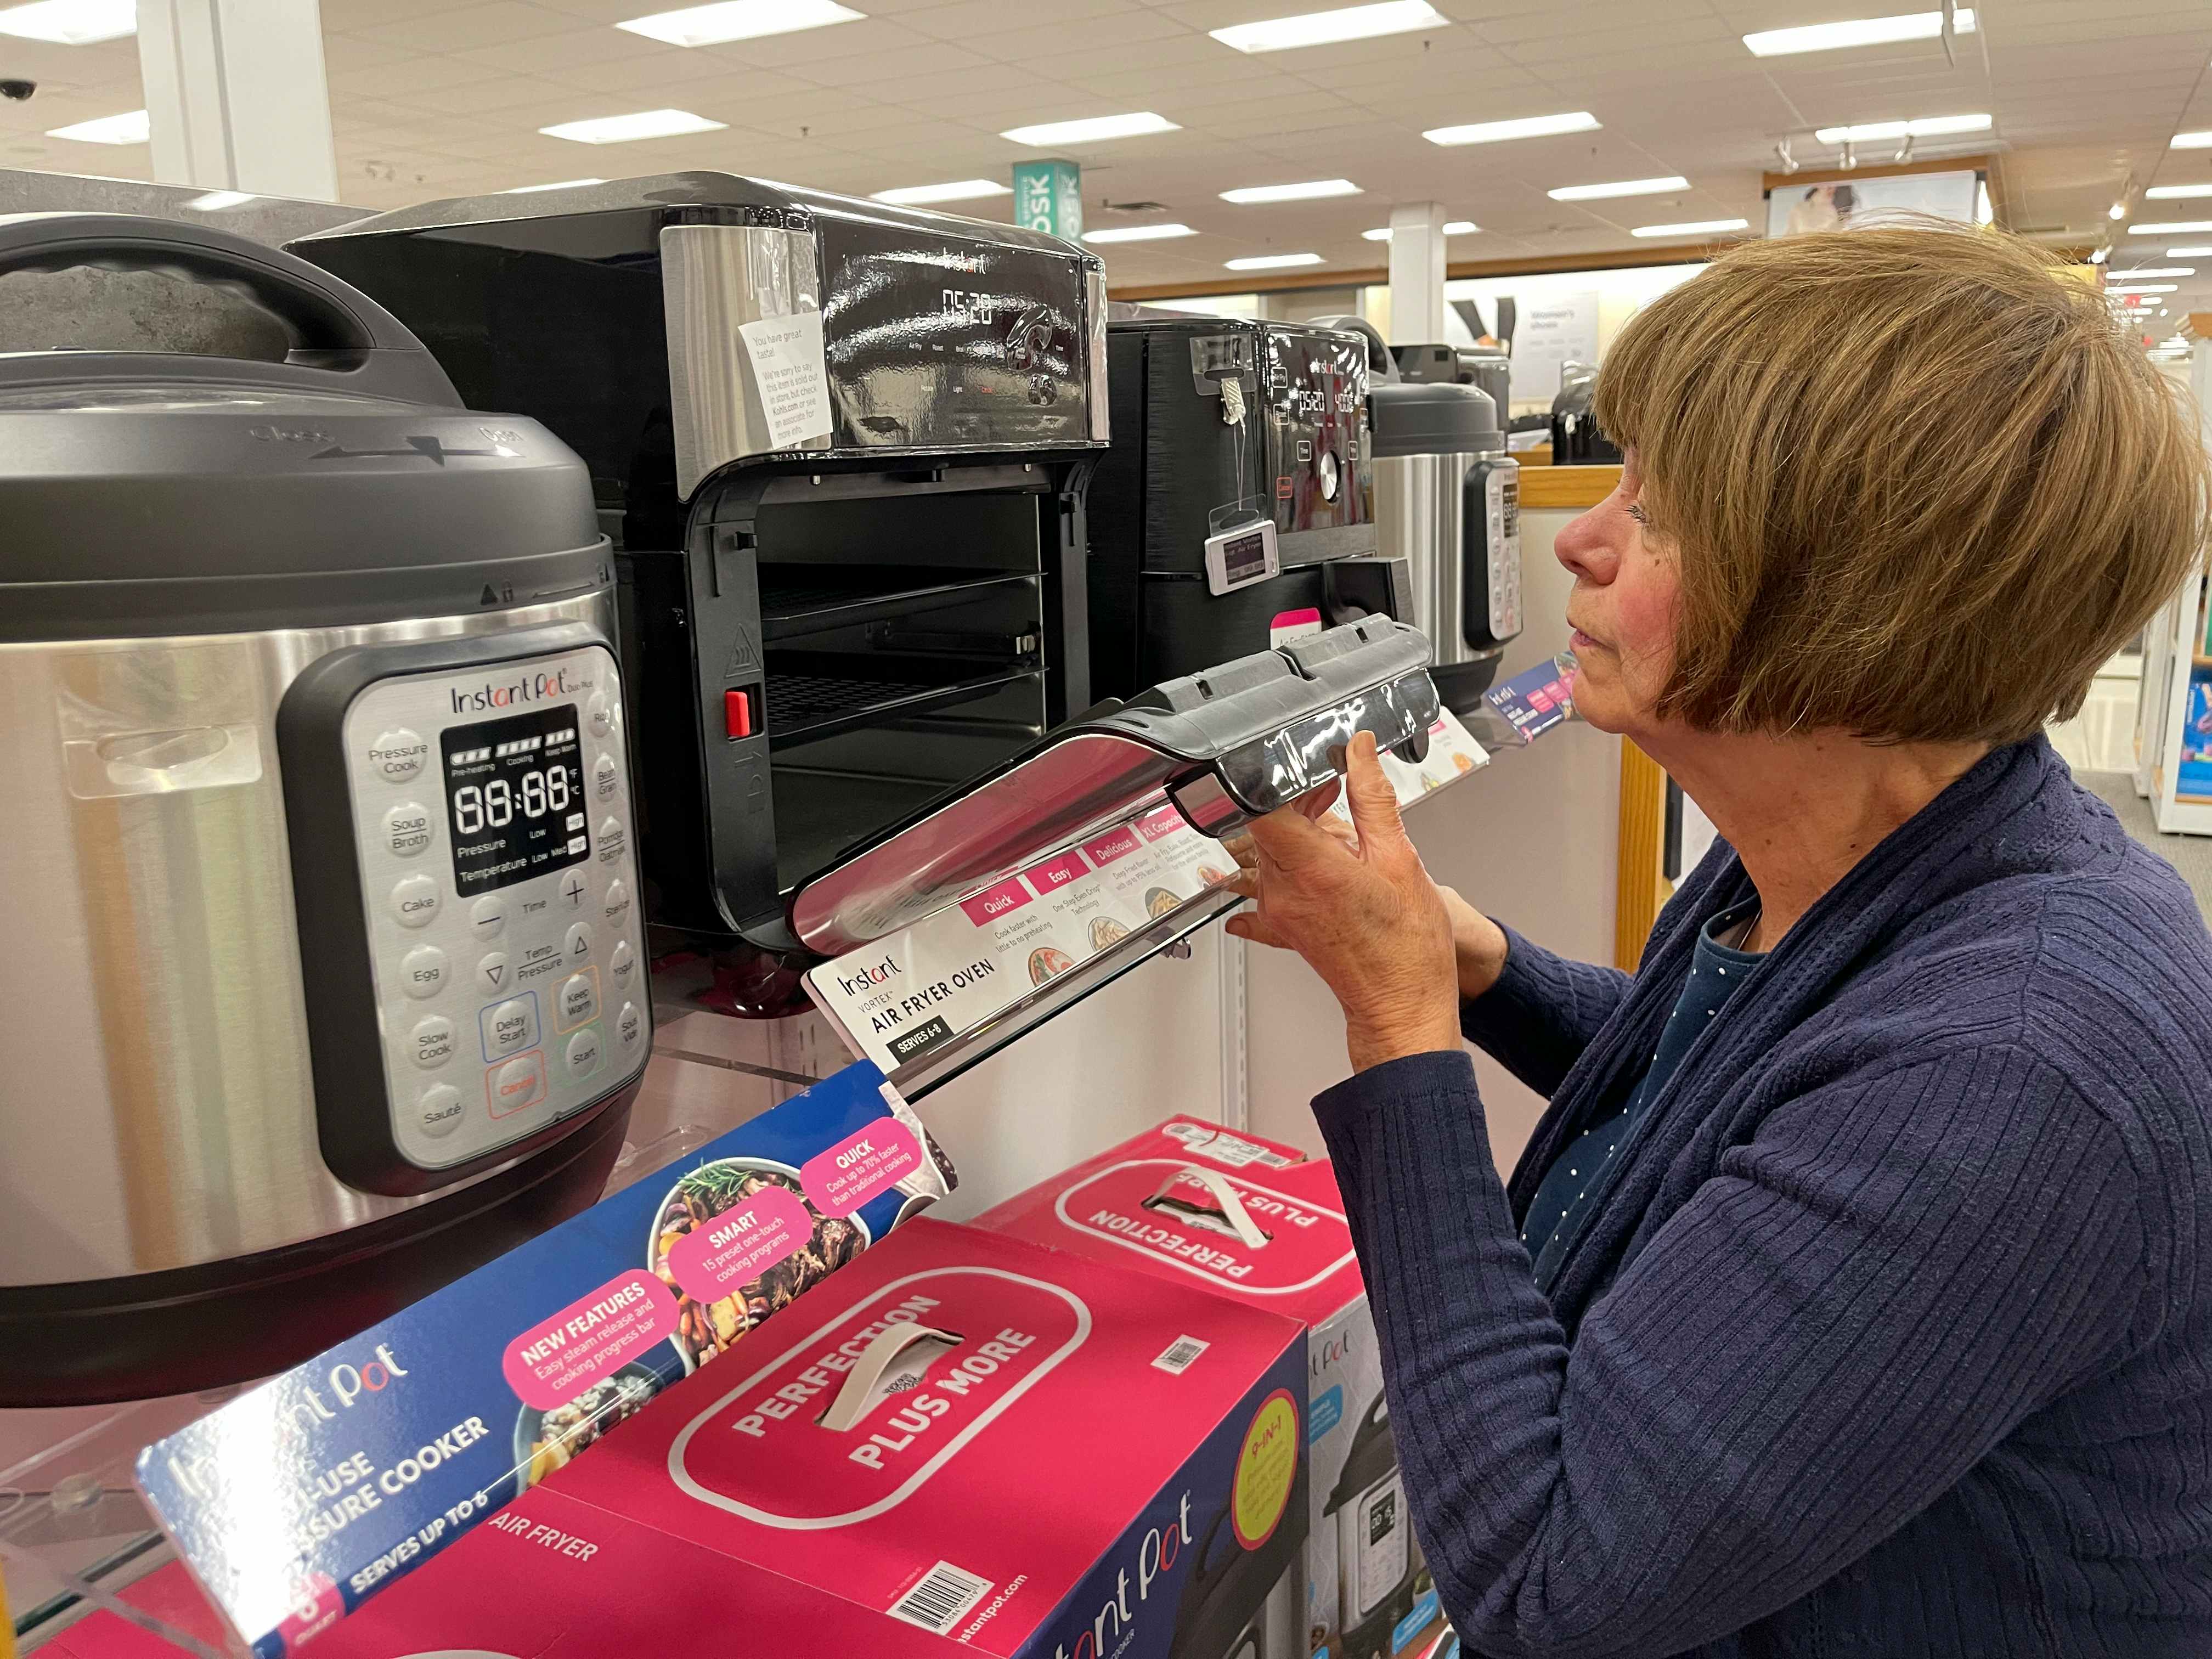 A woman looking at Instant air fryer machines at Kohl's